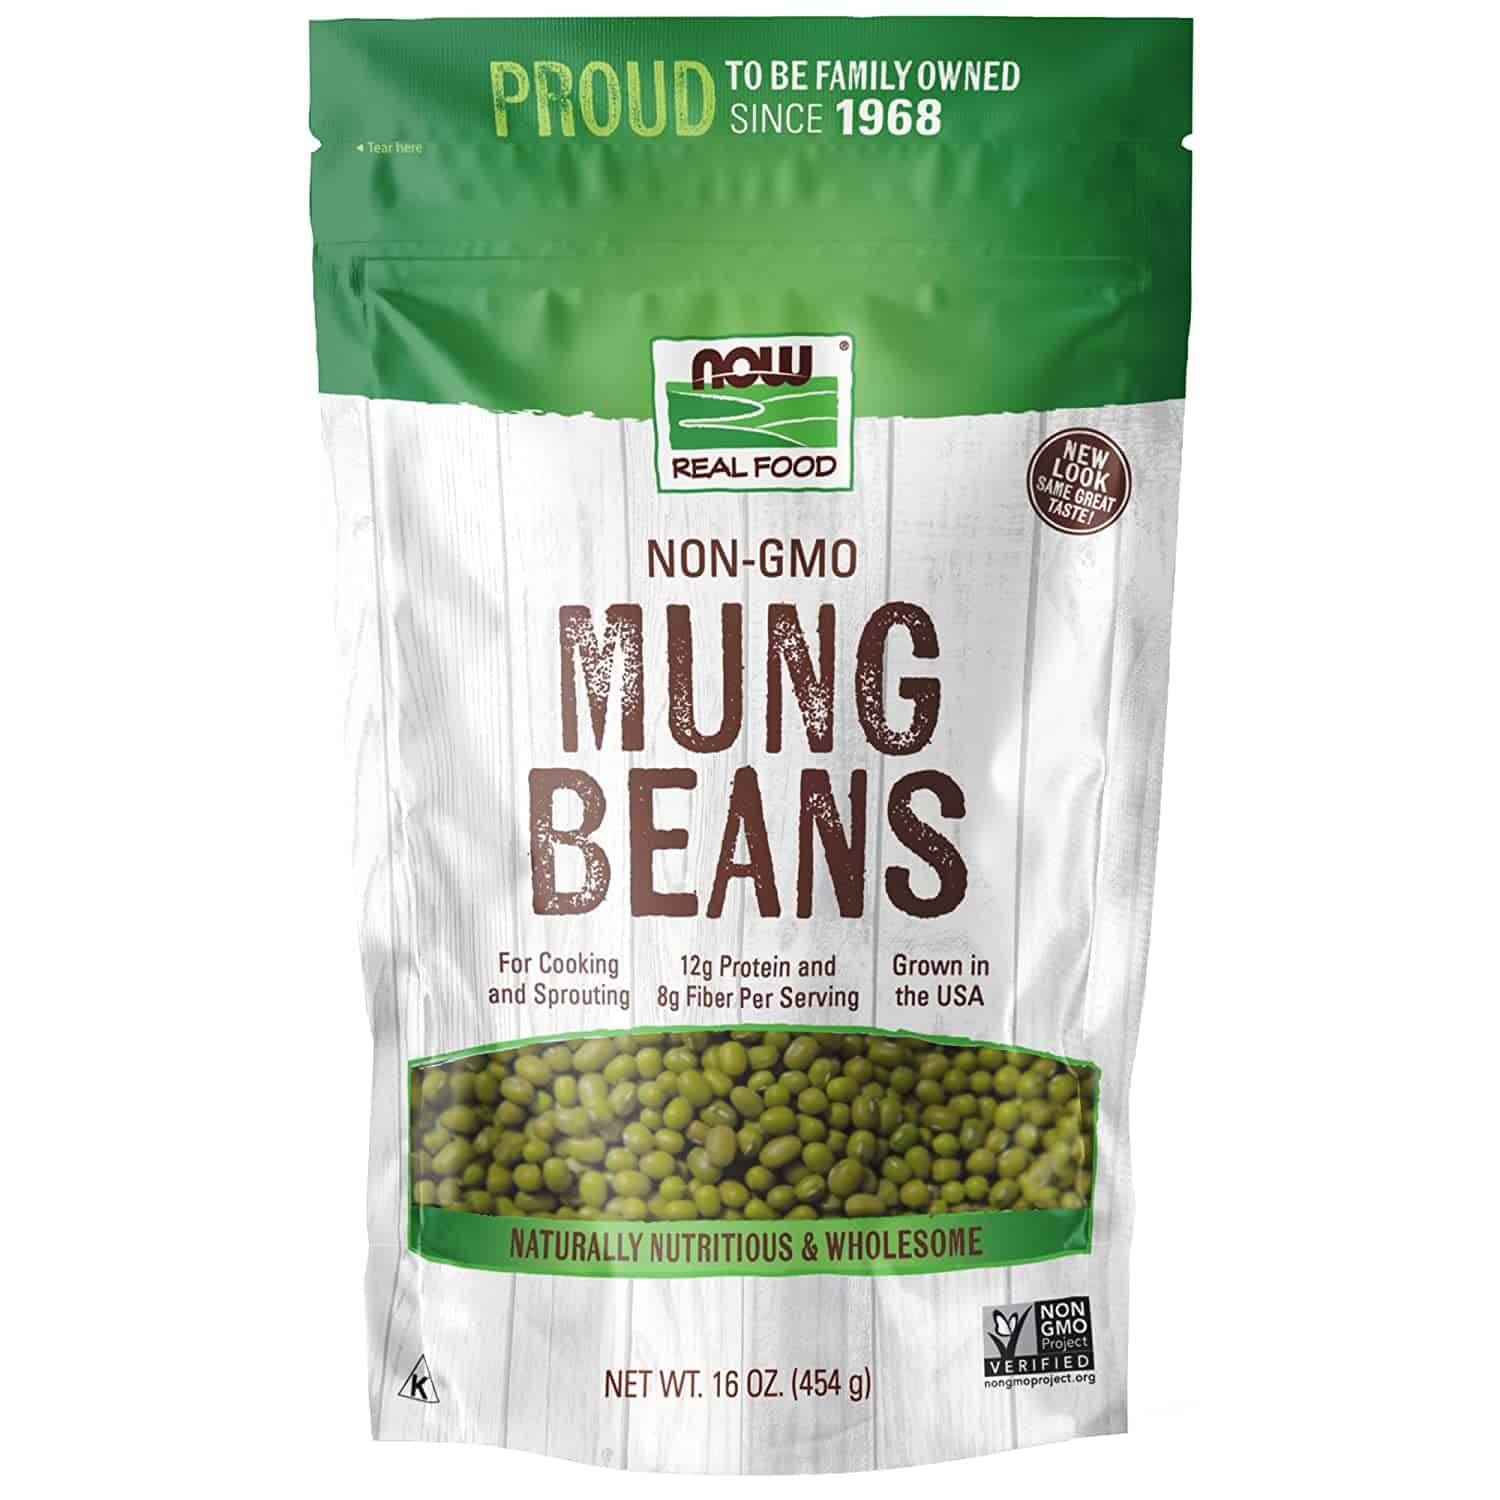 Best mung beans for sprouting: NOW Foods Non-GMO Mung Beans